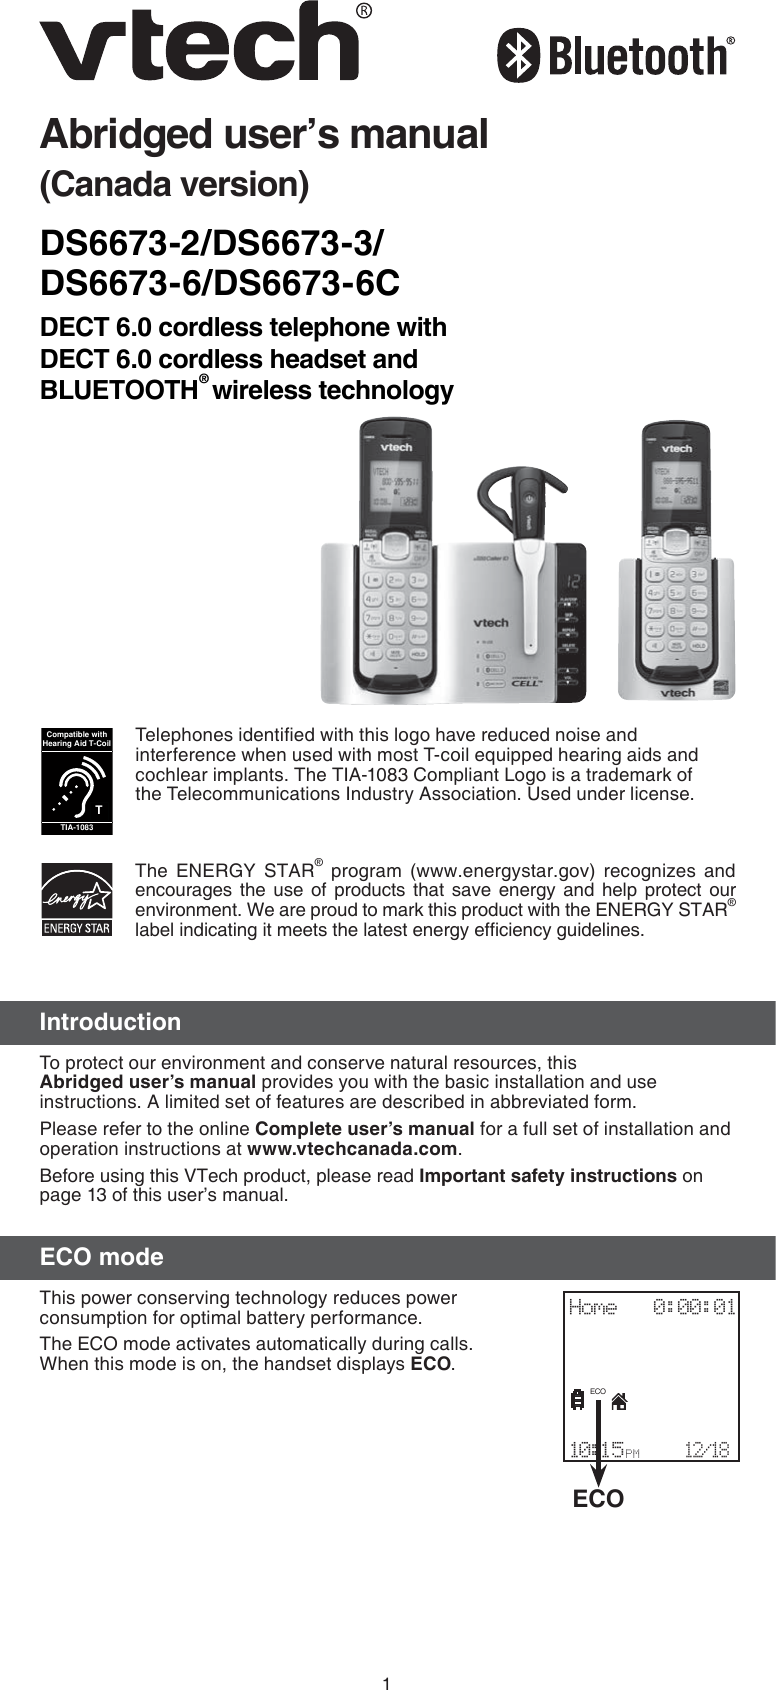 1DS6673-2/DS6673-3/ DS6673-6/DS6673-6CDECT 6.0 cordless telephone with  DECT 6.0 cordless headset and BLUETOOTH® wireless technologyAbridged user’s manual(Canada version)IntroductionTo protect our environment and conserve natural resources, this Abridged user’s manual provides you with the basic installation and use instructions. A limited set of features are described in abbreviated form.Please refer to the online Complete user’s manual for a full set of installation and operation instructions at www.vtechcanada.com.Before using this VTech product, please read Important safety instructions on page 13 of this user’s manual.ECO modeThis power conserving technology reduces power consumption for optimal battery performance. The ECO mode activates automatically during calls.  When this mode is on, the handset displays ECO.The ENERGY STAR® program (www.energystar.gov) recognizes and encourages the use of products that save energy and help protect our environment. We are proud to mark this product with the ENERGY STAR® label indicating it meets the latest energy efﬁciency guidelines.Telephones identiﬁed with this logo have reduced noise and interference when used with most T-coil equipped hearing aids and cochlear implants. The TIA-1083 Compliant Logo is a trademark of the Telecommunications Industry Association. Used under license.TCompatible withHearing Aid T-CoilTIA-1083ECOHome   0:00:01                         10:15 PM    12/18ECO